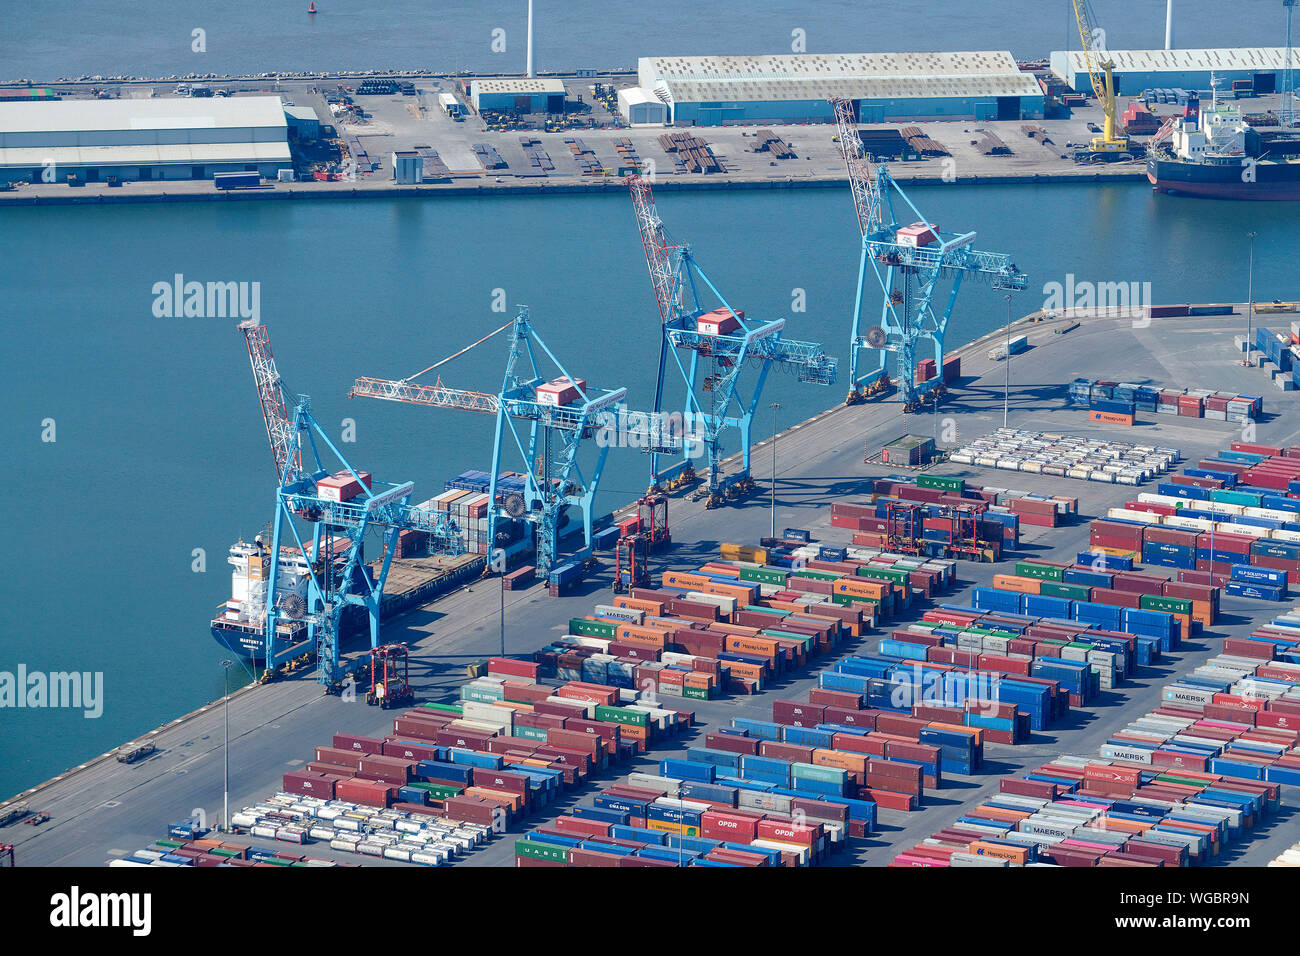 An aerial view of containers on the dockside at Seaforth Docks, Liverpool, Merseyside, North West England, UK Stock Photo